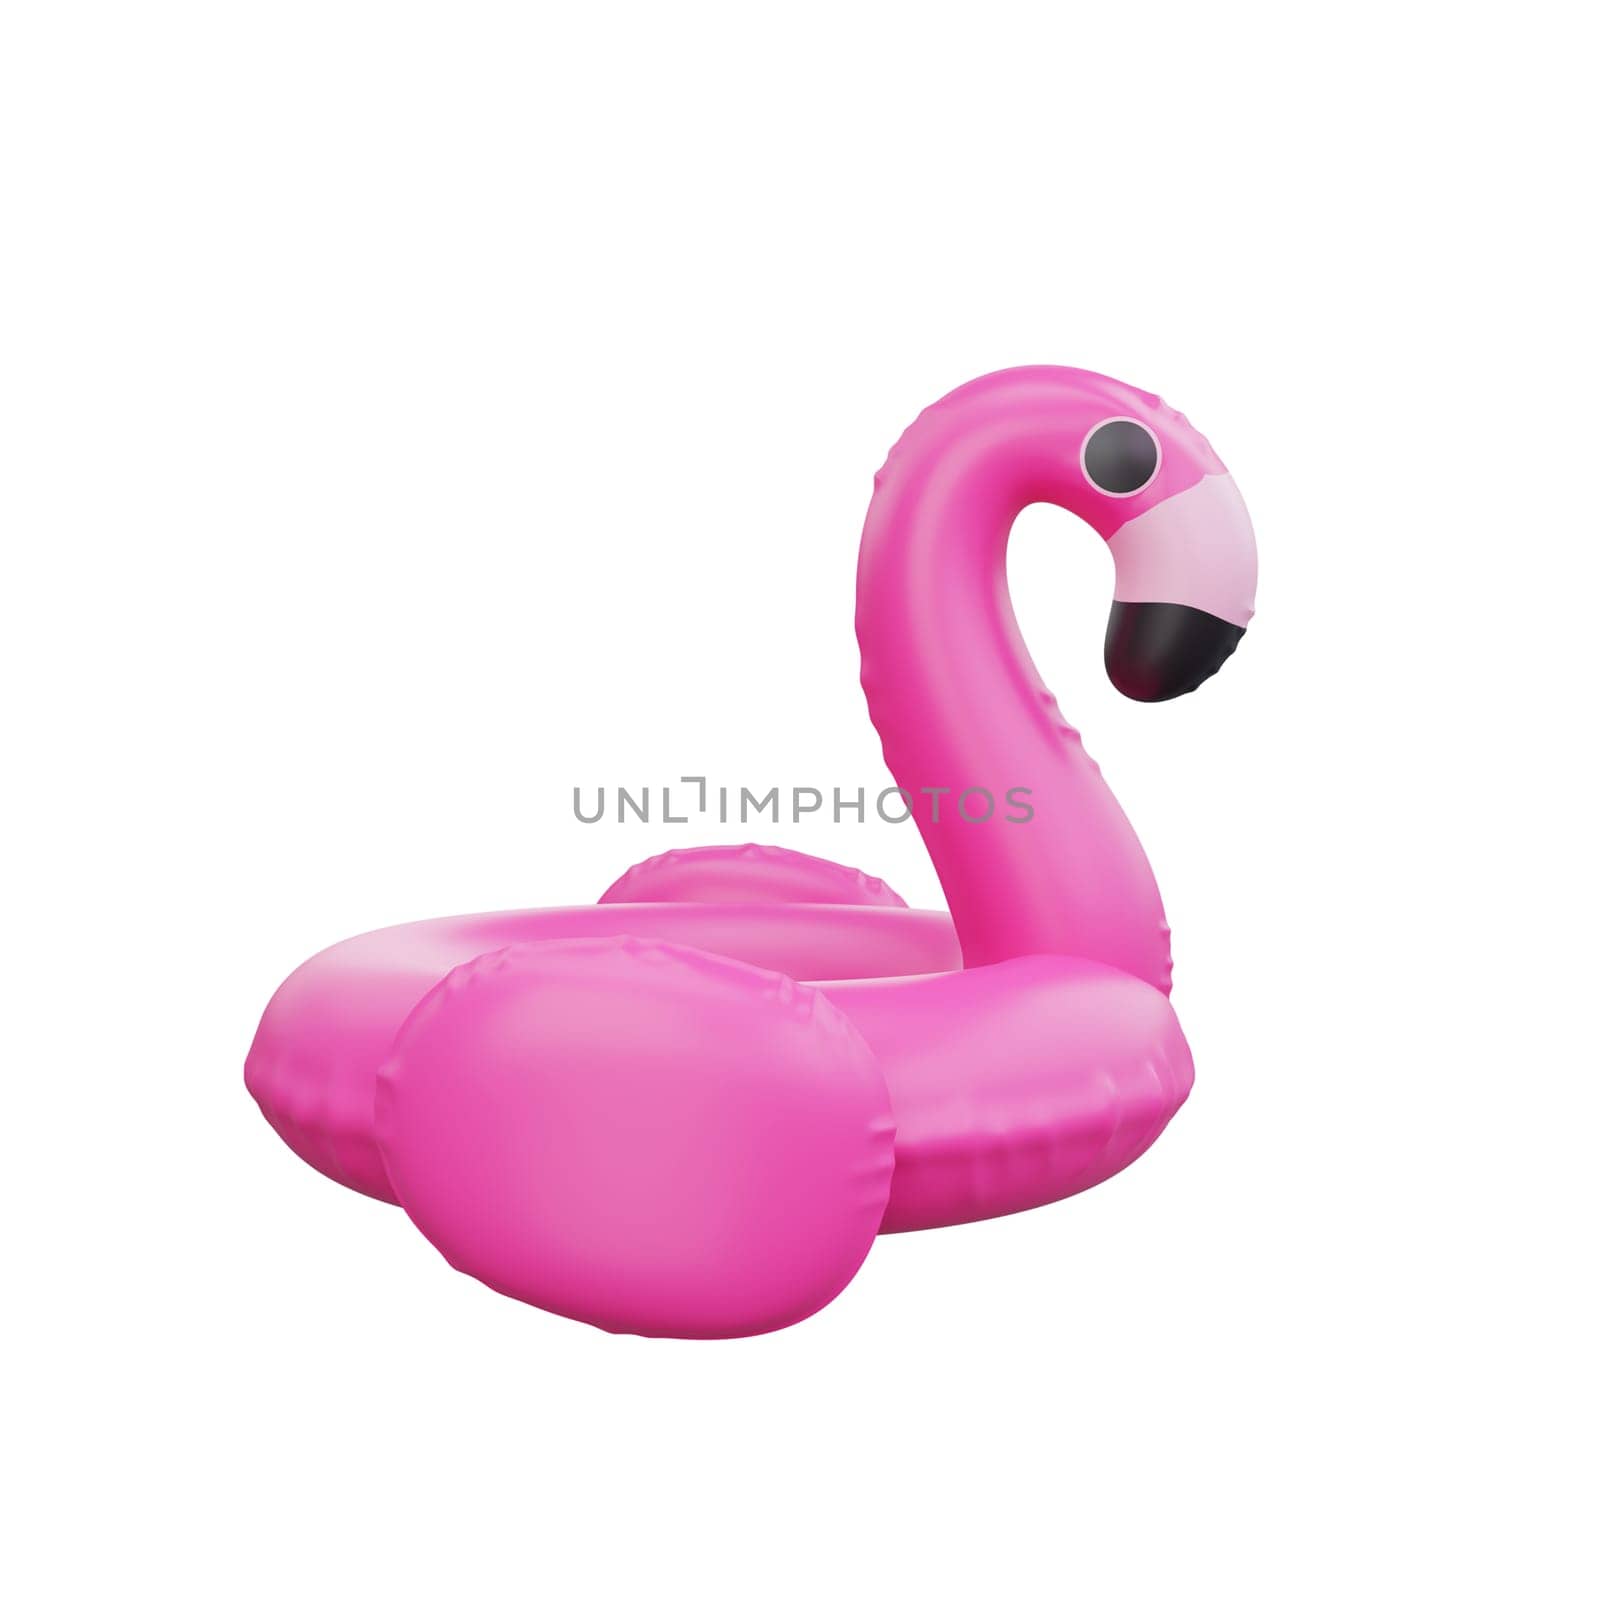 3D rendering of a playful inflatable pink flamingo pool float, symbolizing summer fun and relaxation